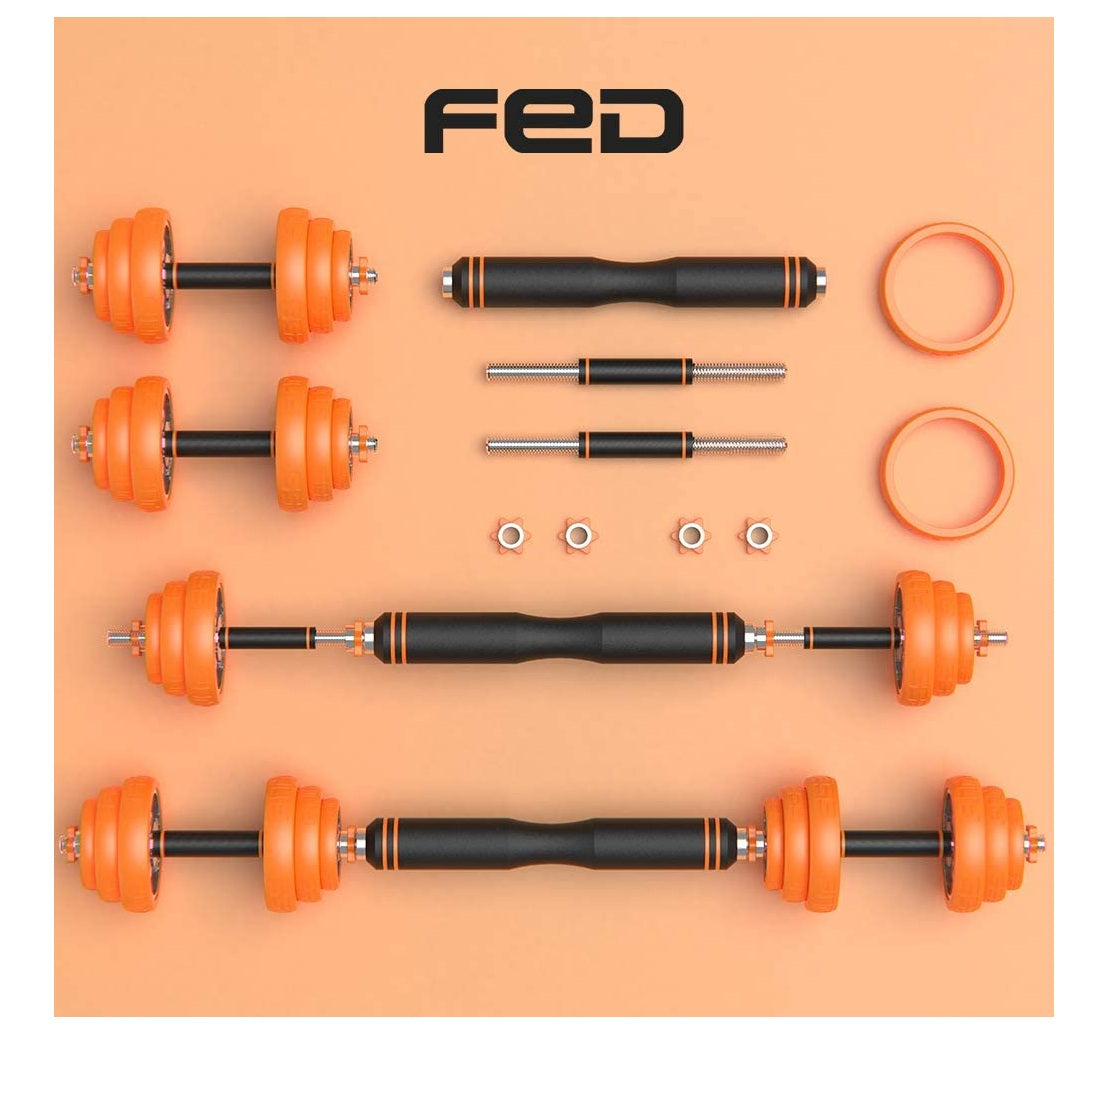 Hukimoyo Unisex  Adjustable Dumbbell Set for Home Workout, Non-Slip Weight Lifting Rod with Plates, Dumbbells set with Extension Bar bell rod.